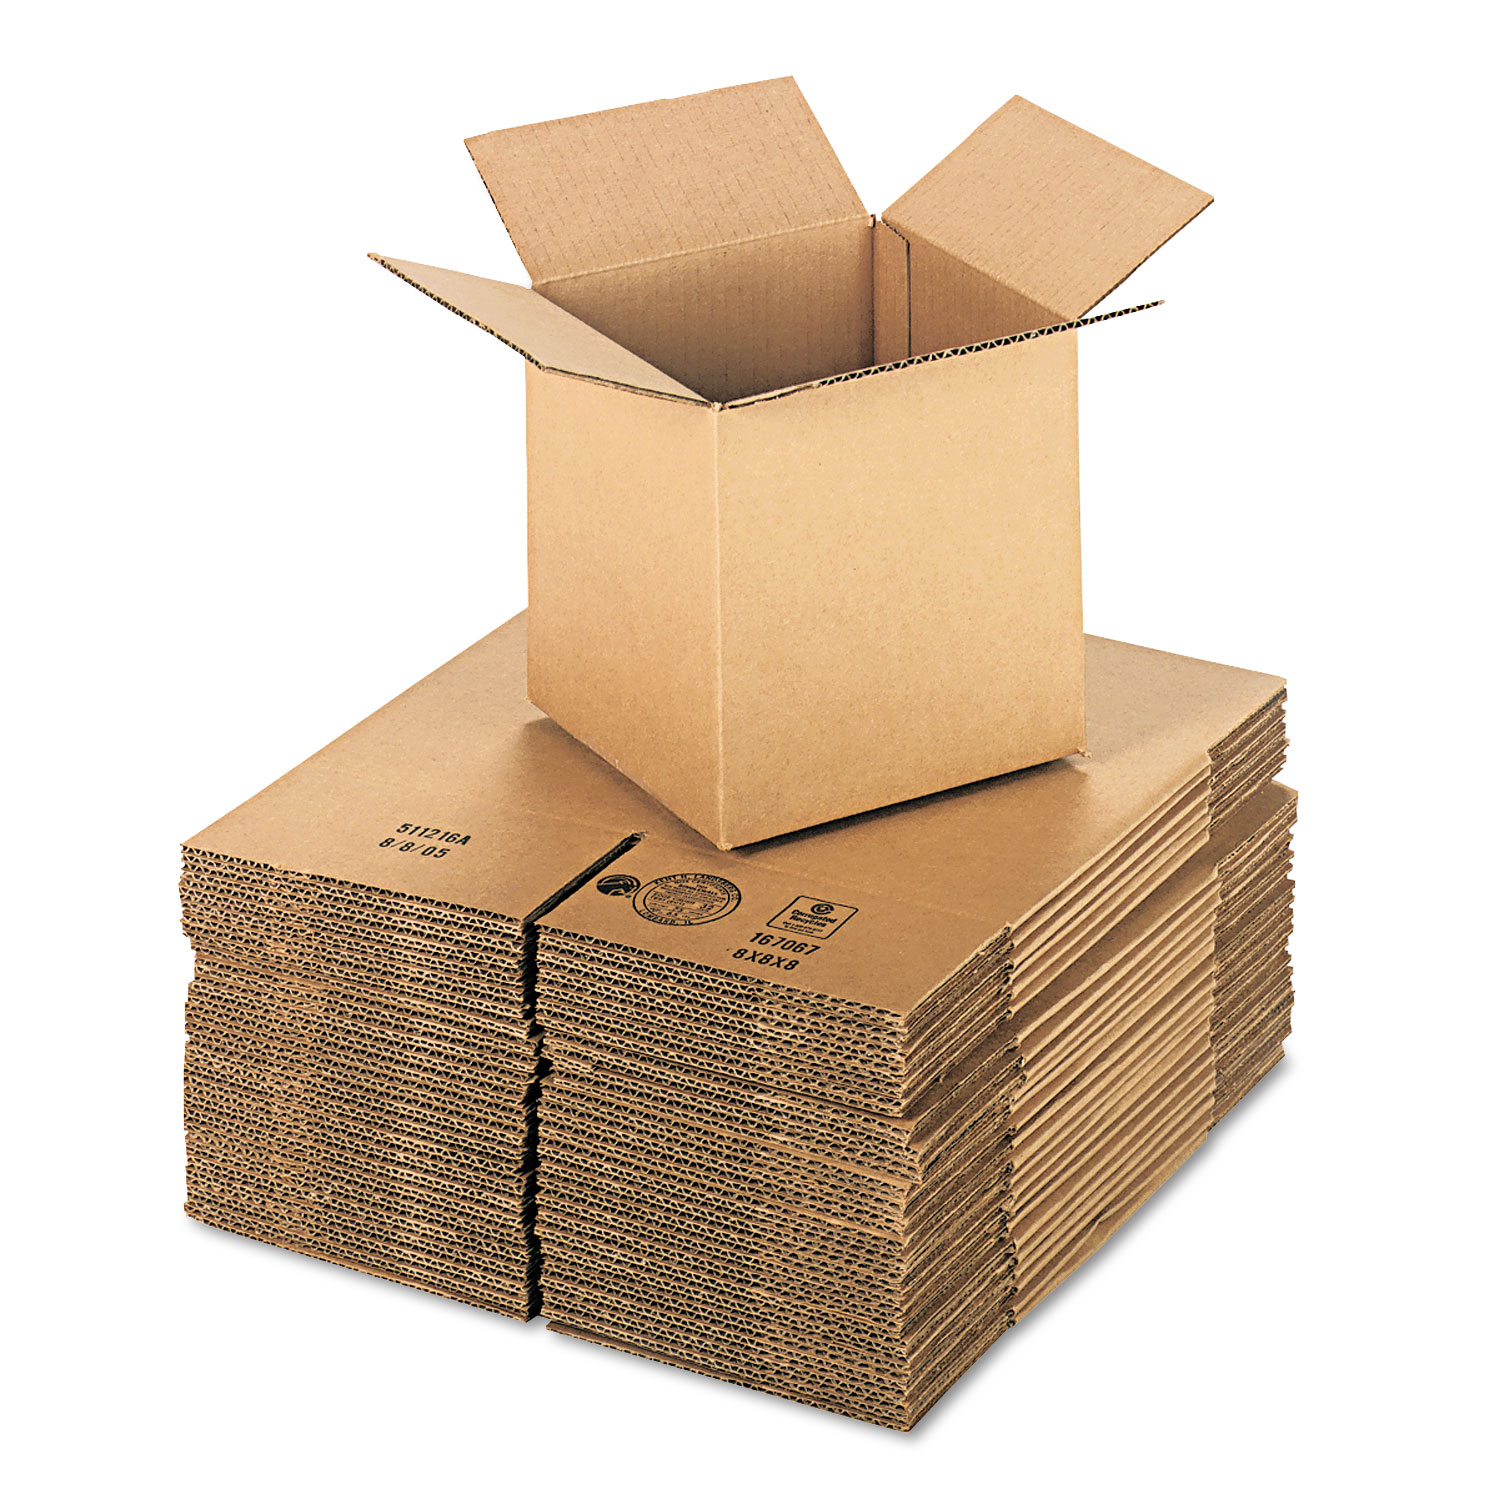  General Supply UFS888 Cubed Fixed-Depth Shipping Boxes, Regular Slotted Container (RSC), 8 x 8 x 8, Brown Kraft, 25/Bundle (UFS888) 